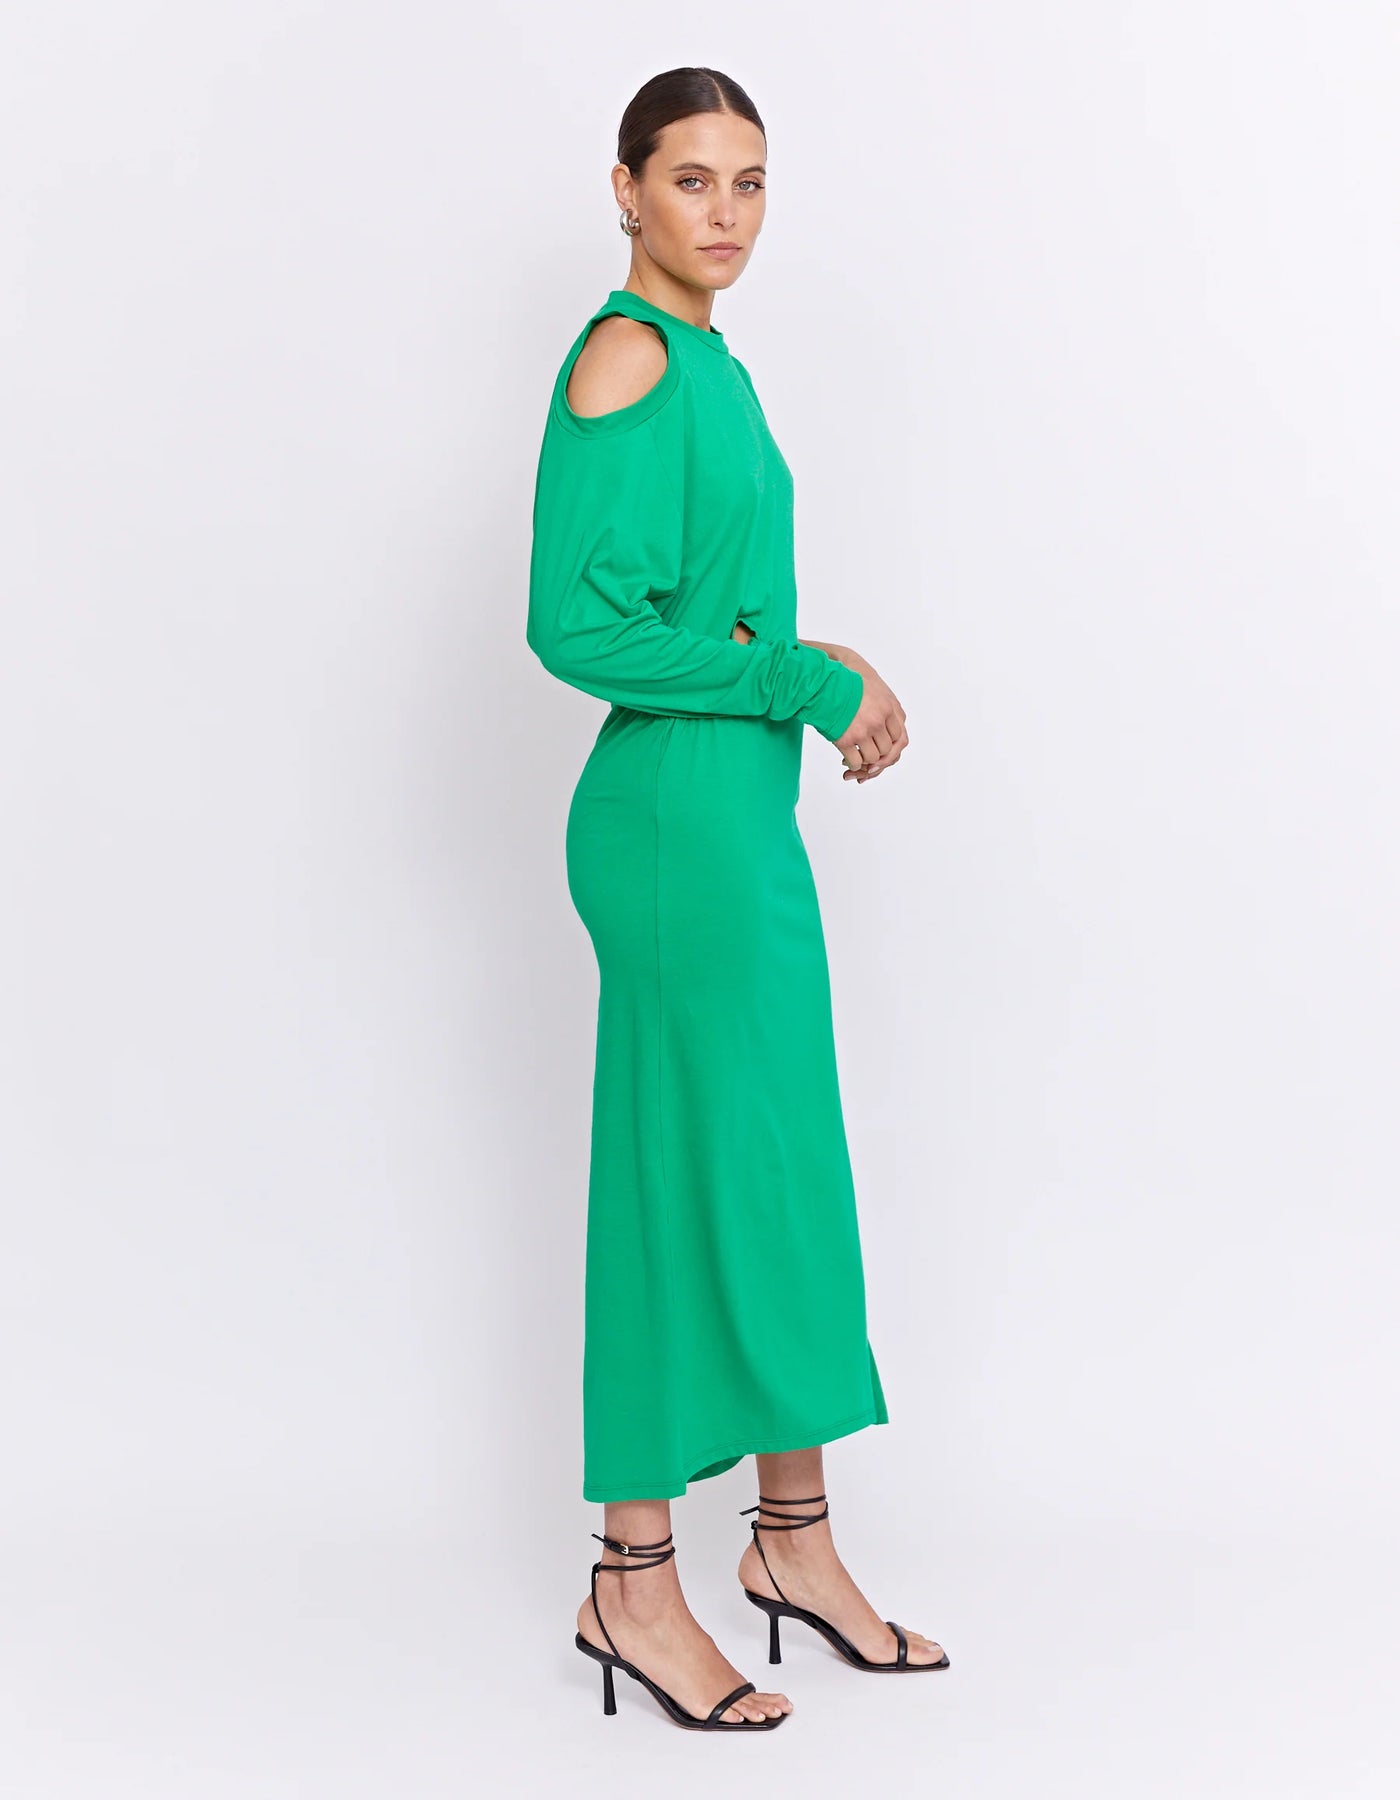 The 808 Two Way Dress - Moss